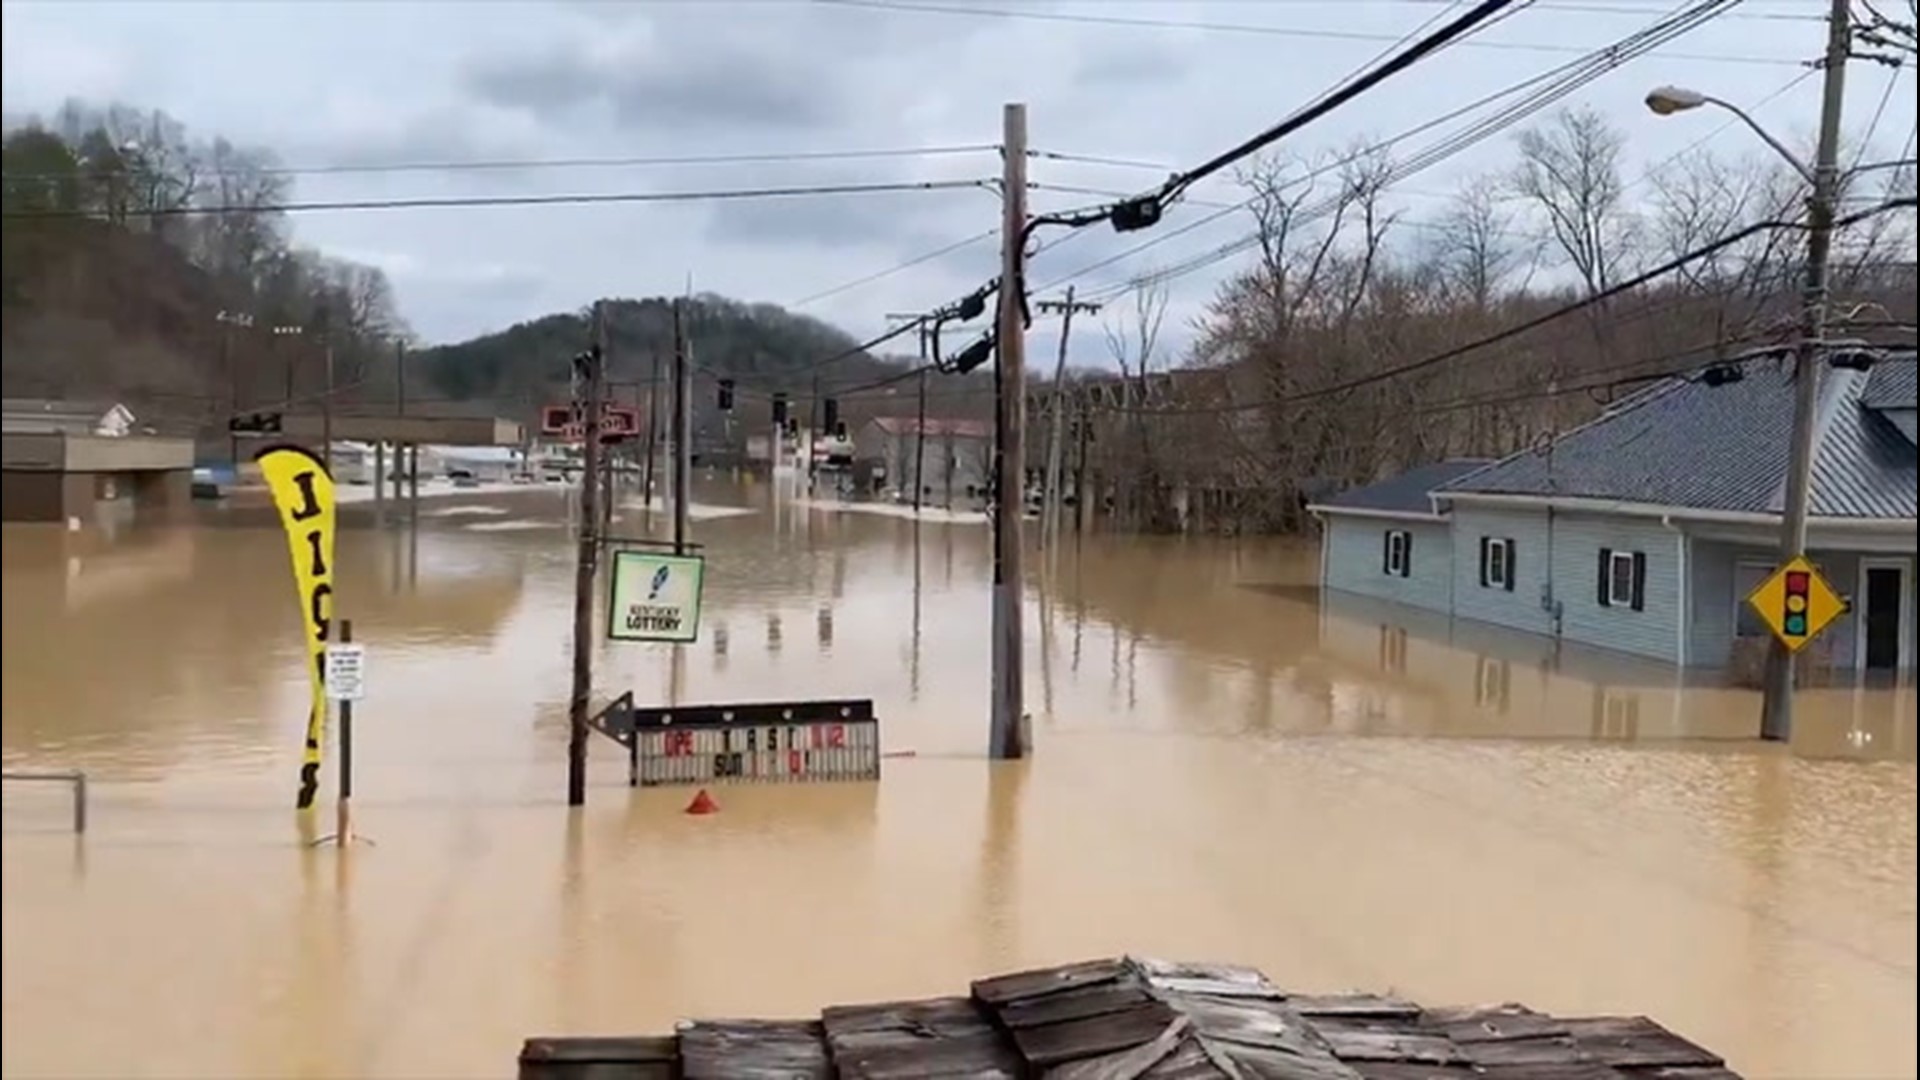 Flooding from rivers and streams amid heavy rain left communities in Kentucky, Tennessee and West Virginia submerged.